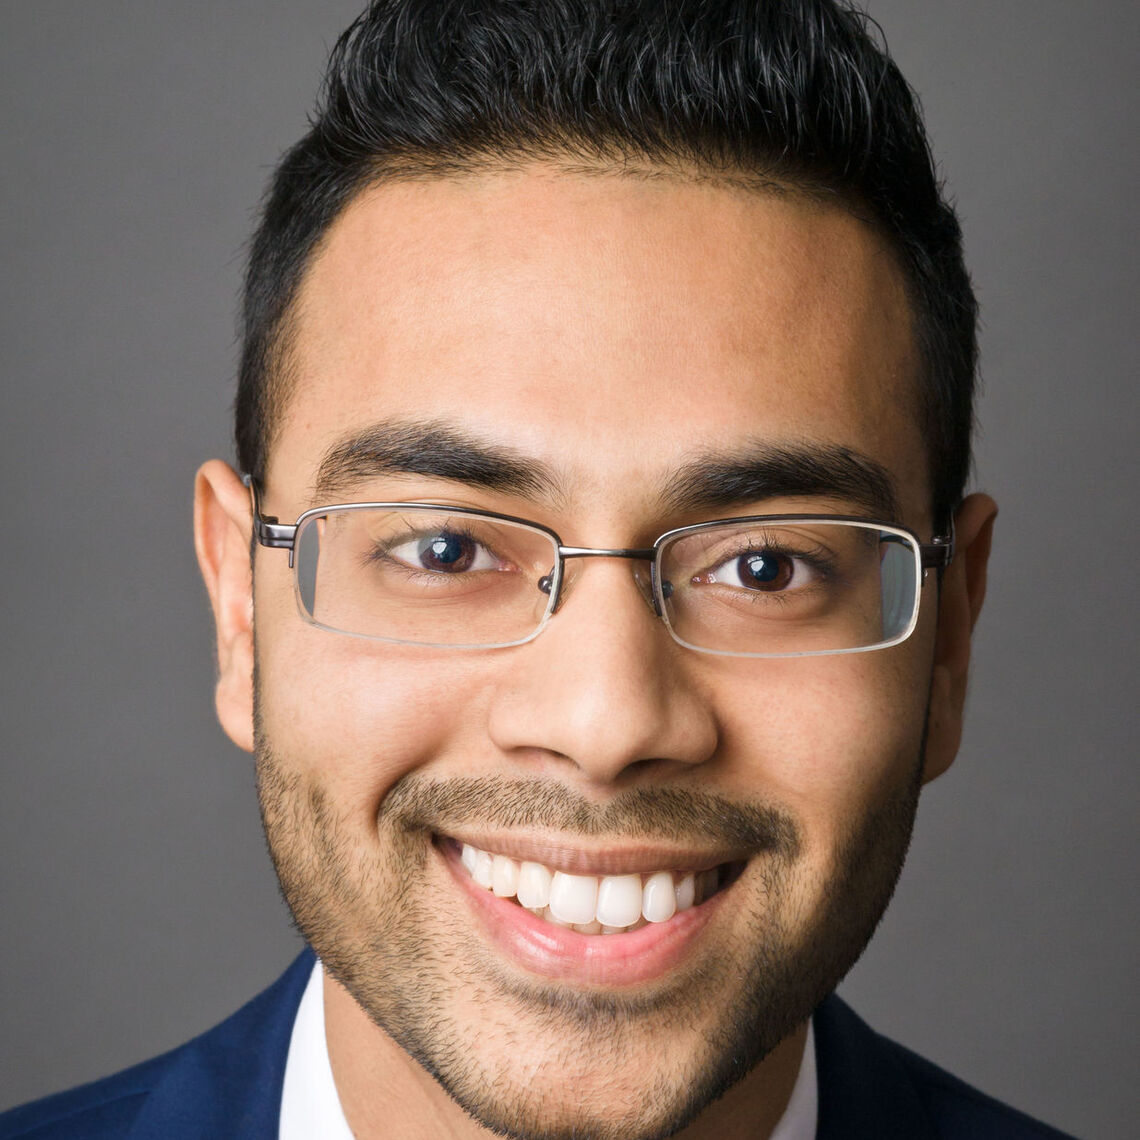 F&M alumnus and current trustee Akbar Hossain ’13 was recently named the executive director of the Shapiro transition team and served as the policy director for the governor-elect's gubernatorial campaign.